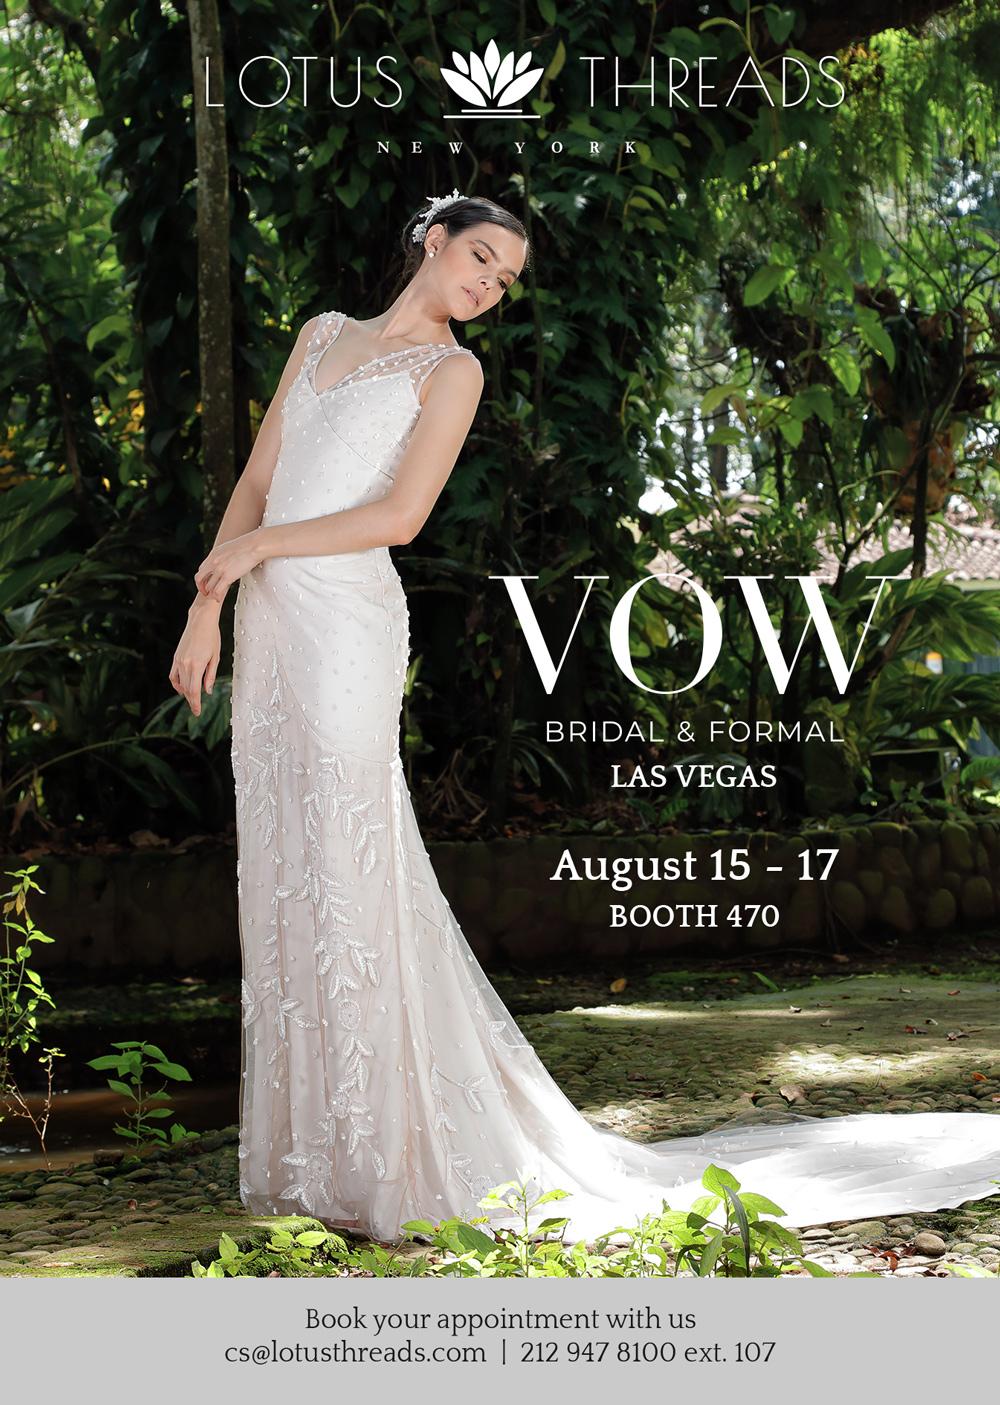 Lotus Threads Brings Contemporary Wedding Gowns To Las Vegas VOW Bridal & Formal